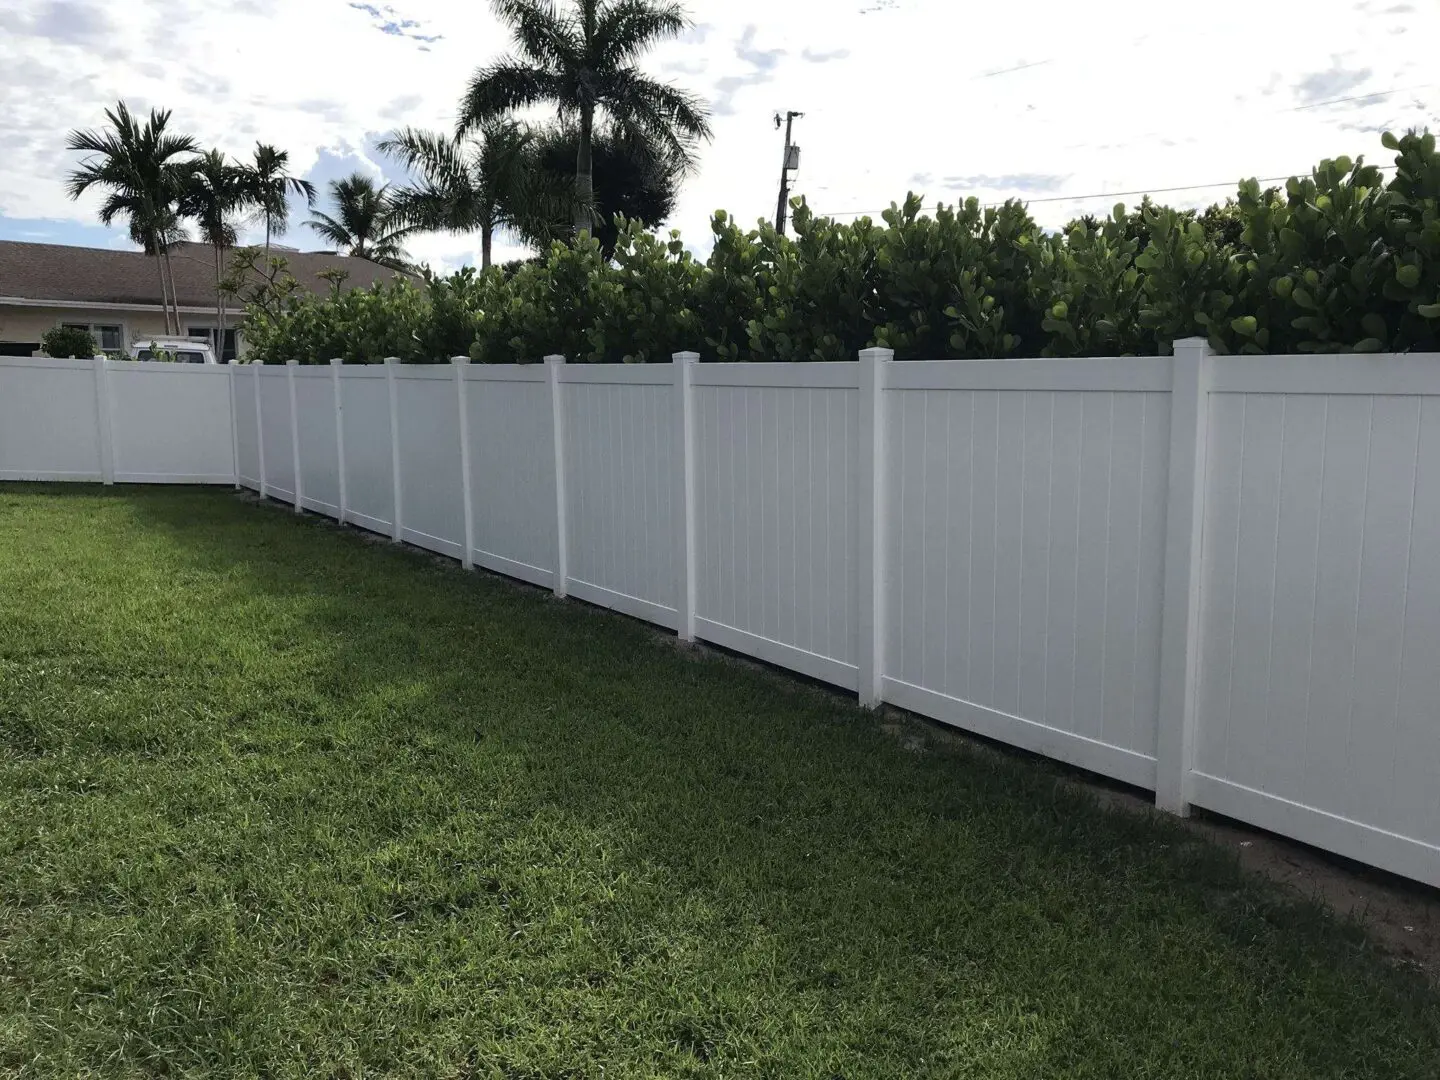 A white fence with palm trees in the background.